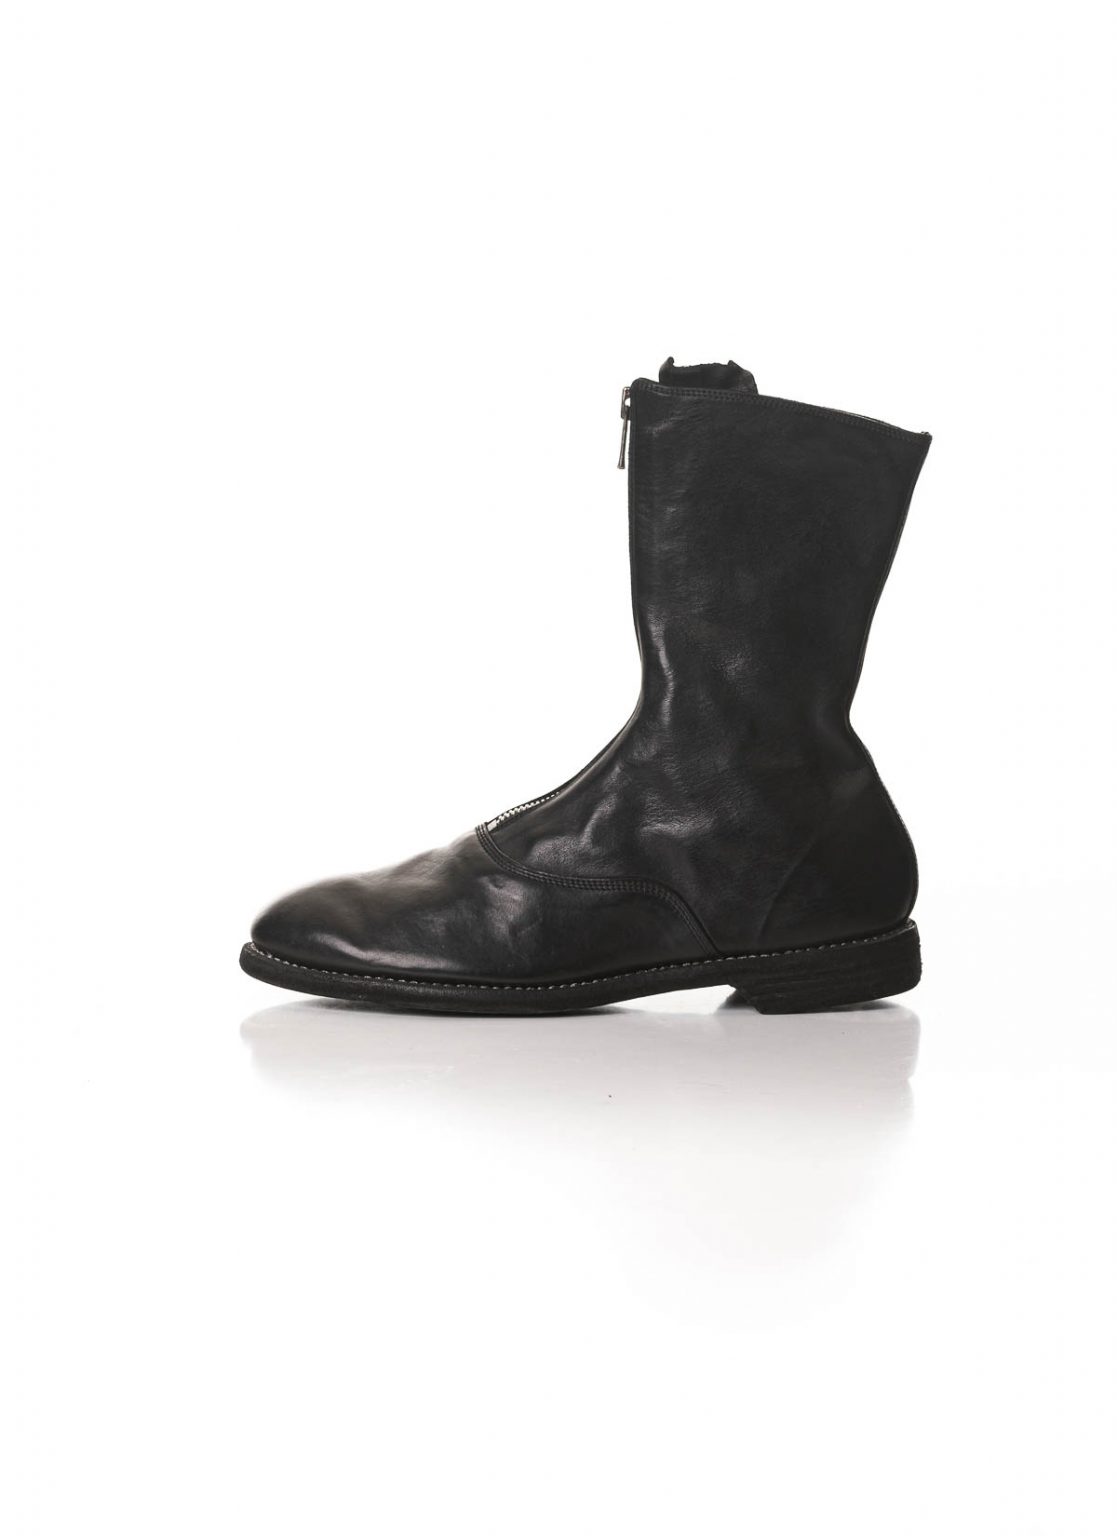 hide-m | GUIDI Men 310 Classic Front Zip Army Boot, black horse leather